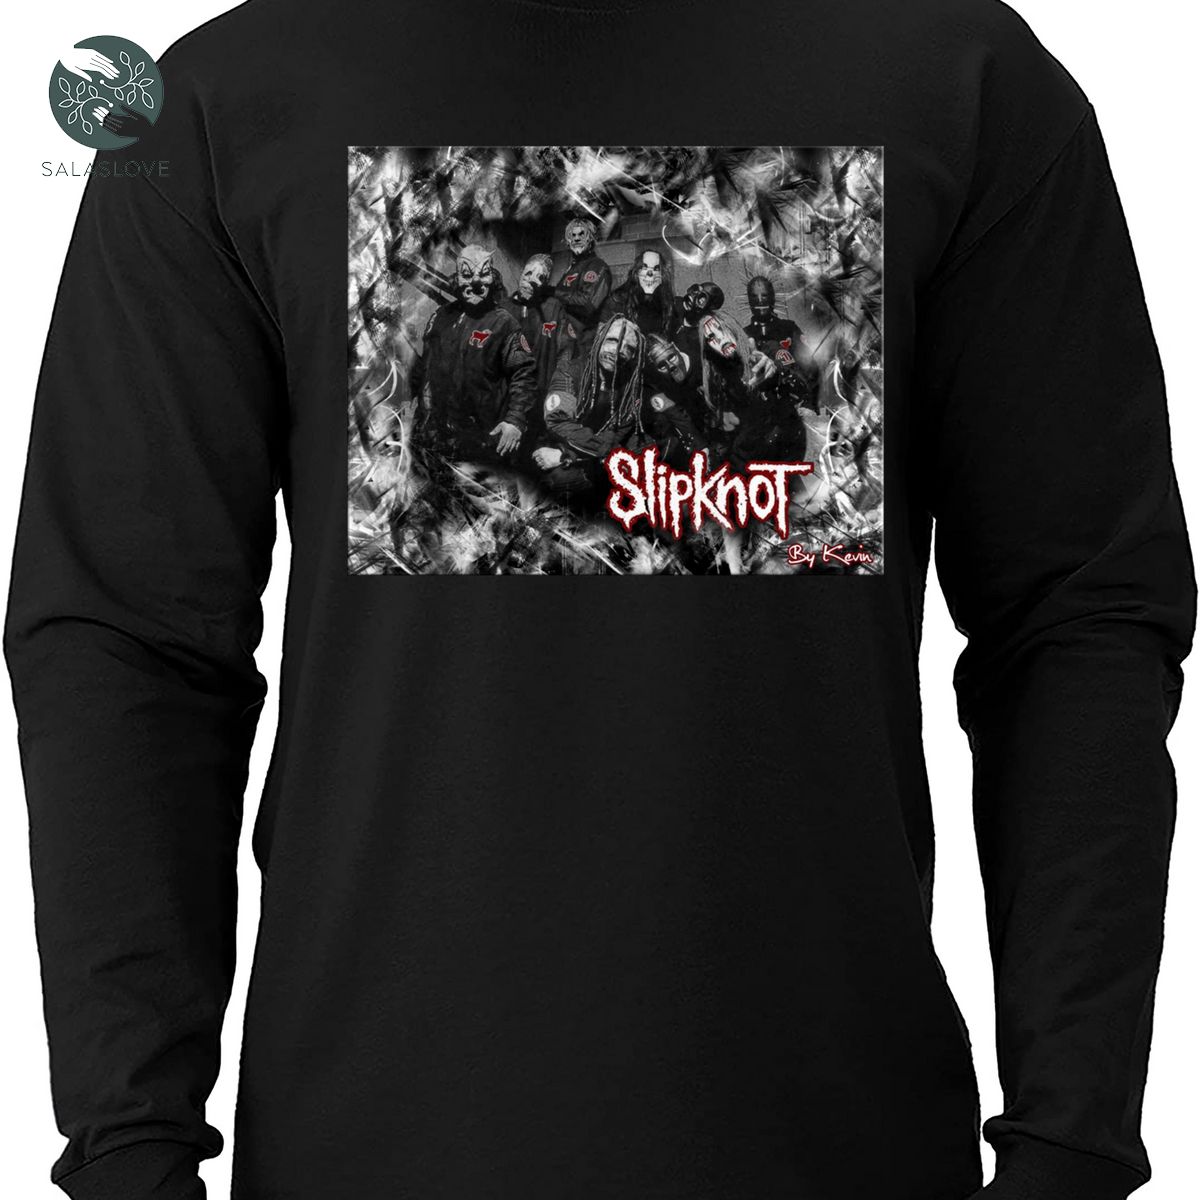 Slipknot Haunted by Something Seriously Spooky in New Yen Video T-shirt